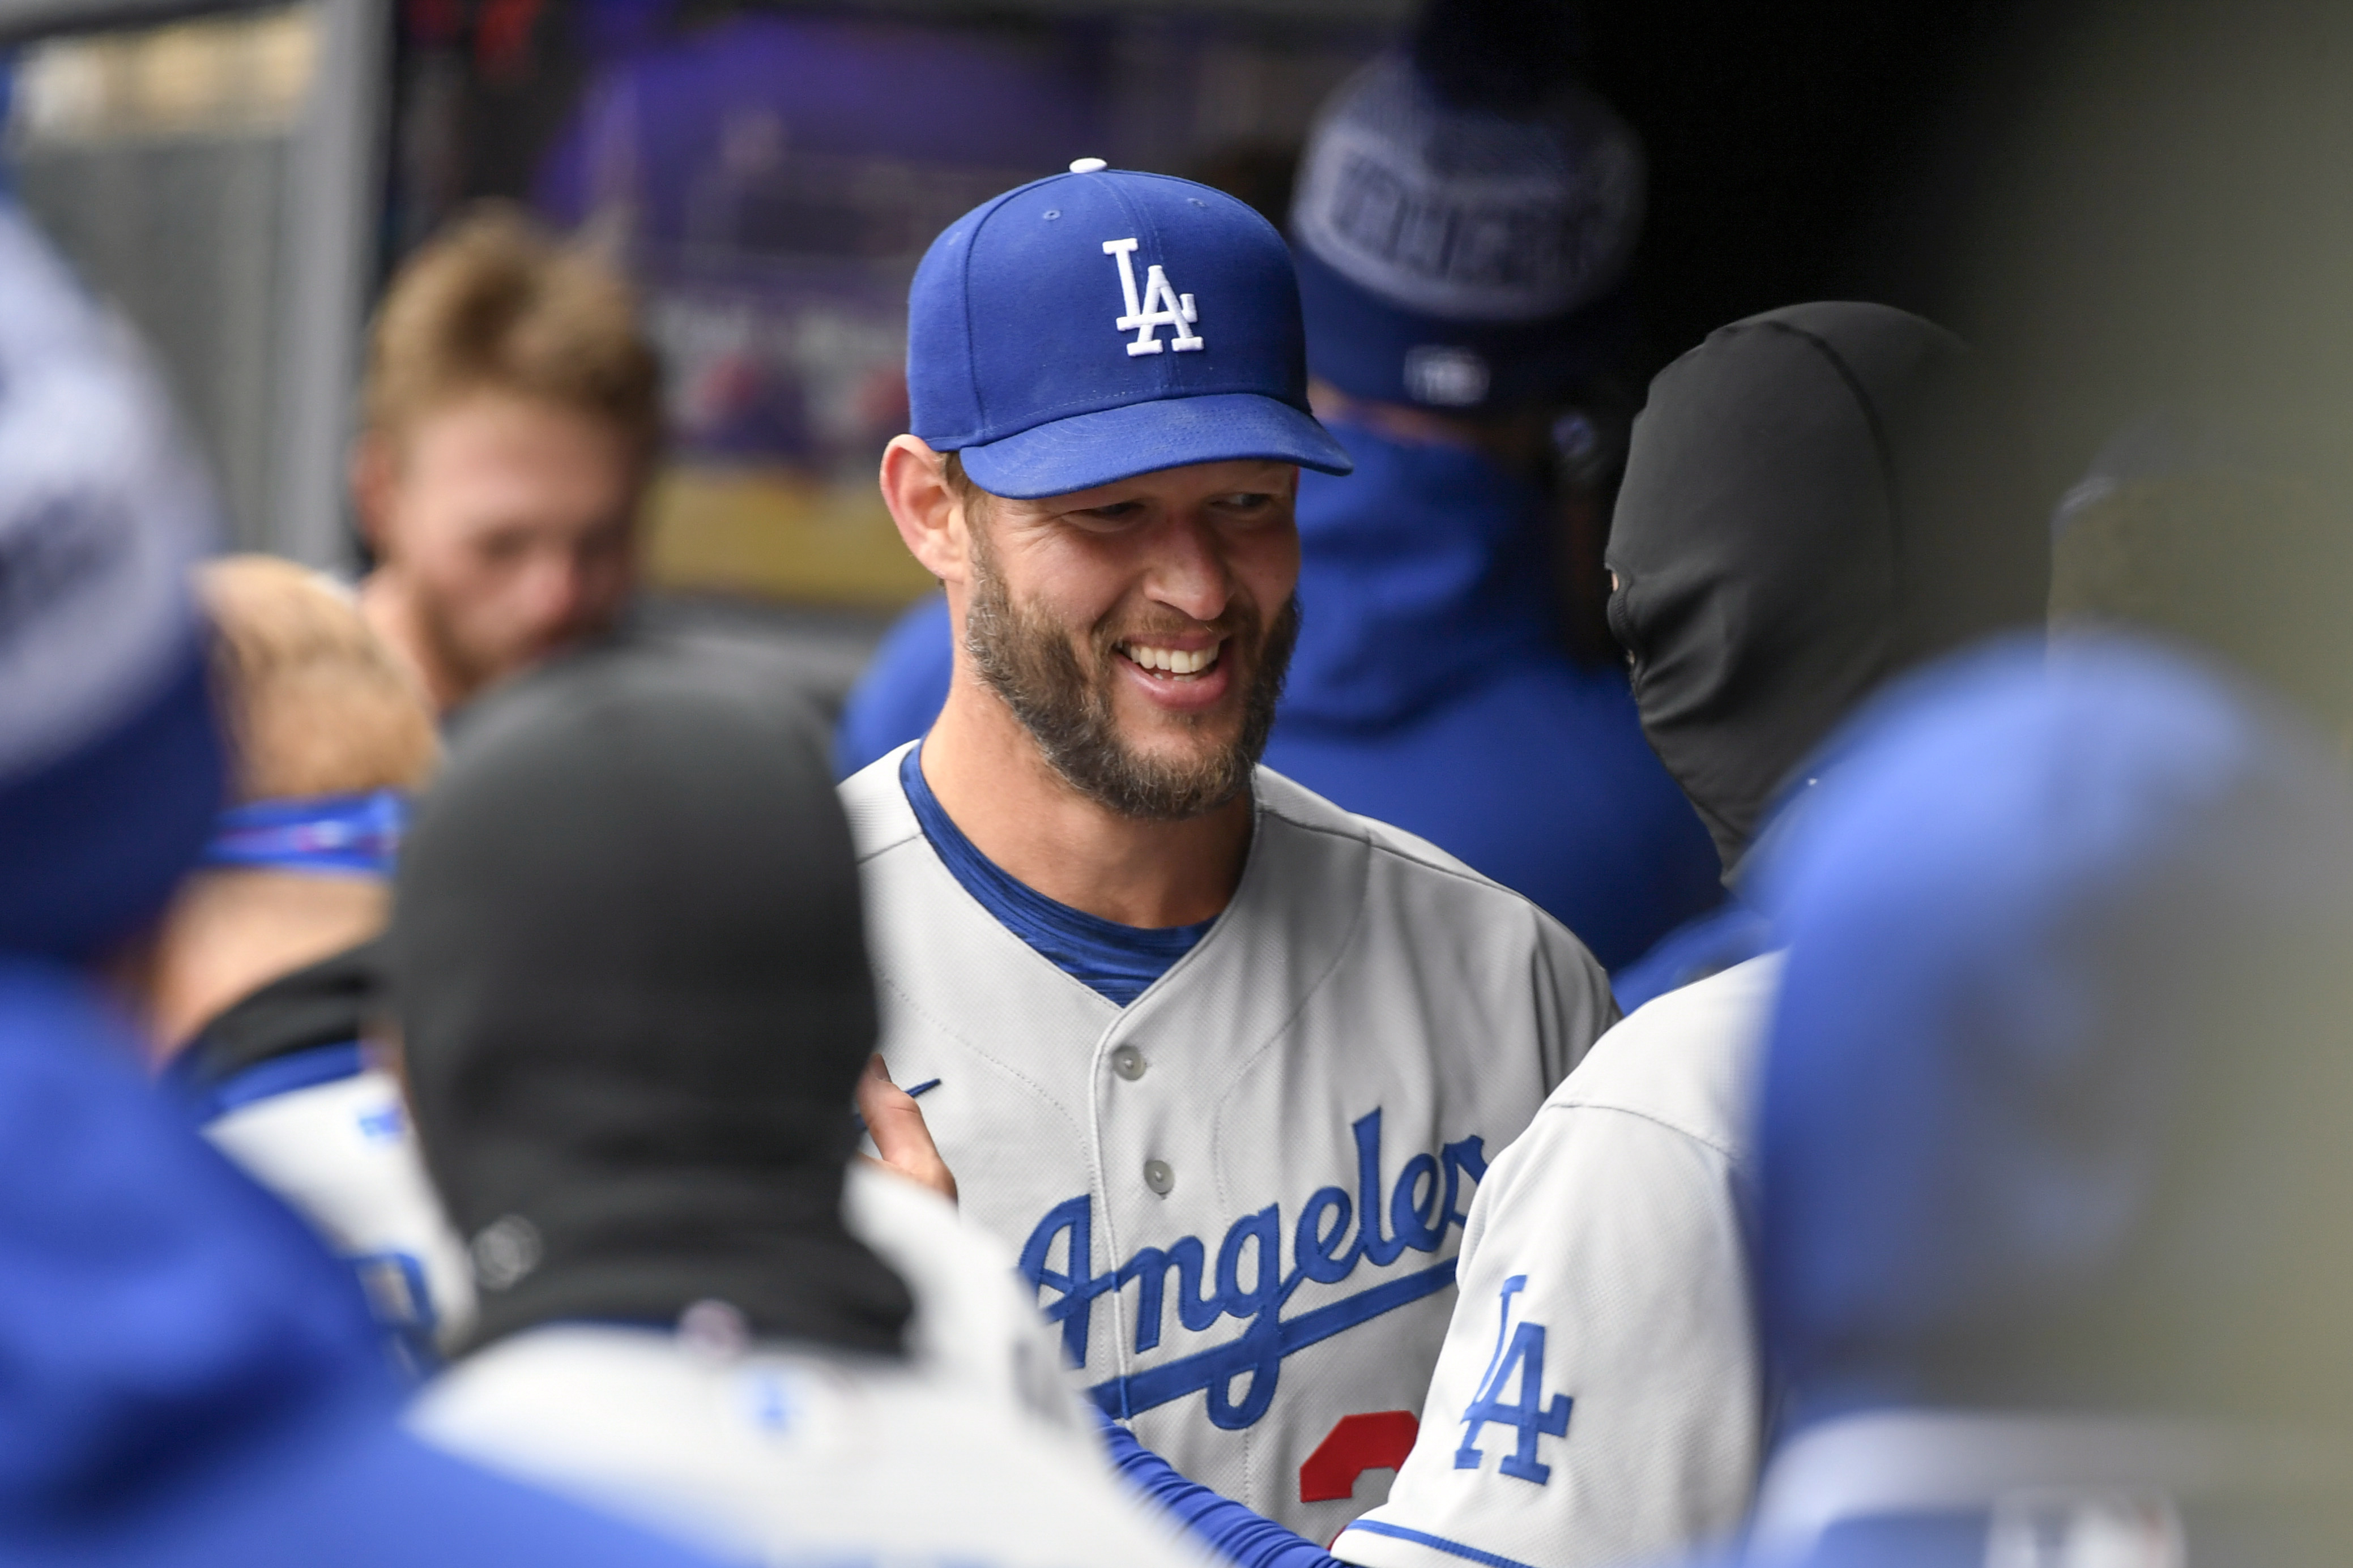 A Father's Day Q&A with Los Angeles Dodgers ace Clayton Kershaw - ESPN